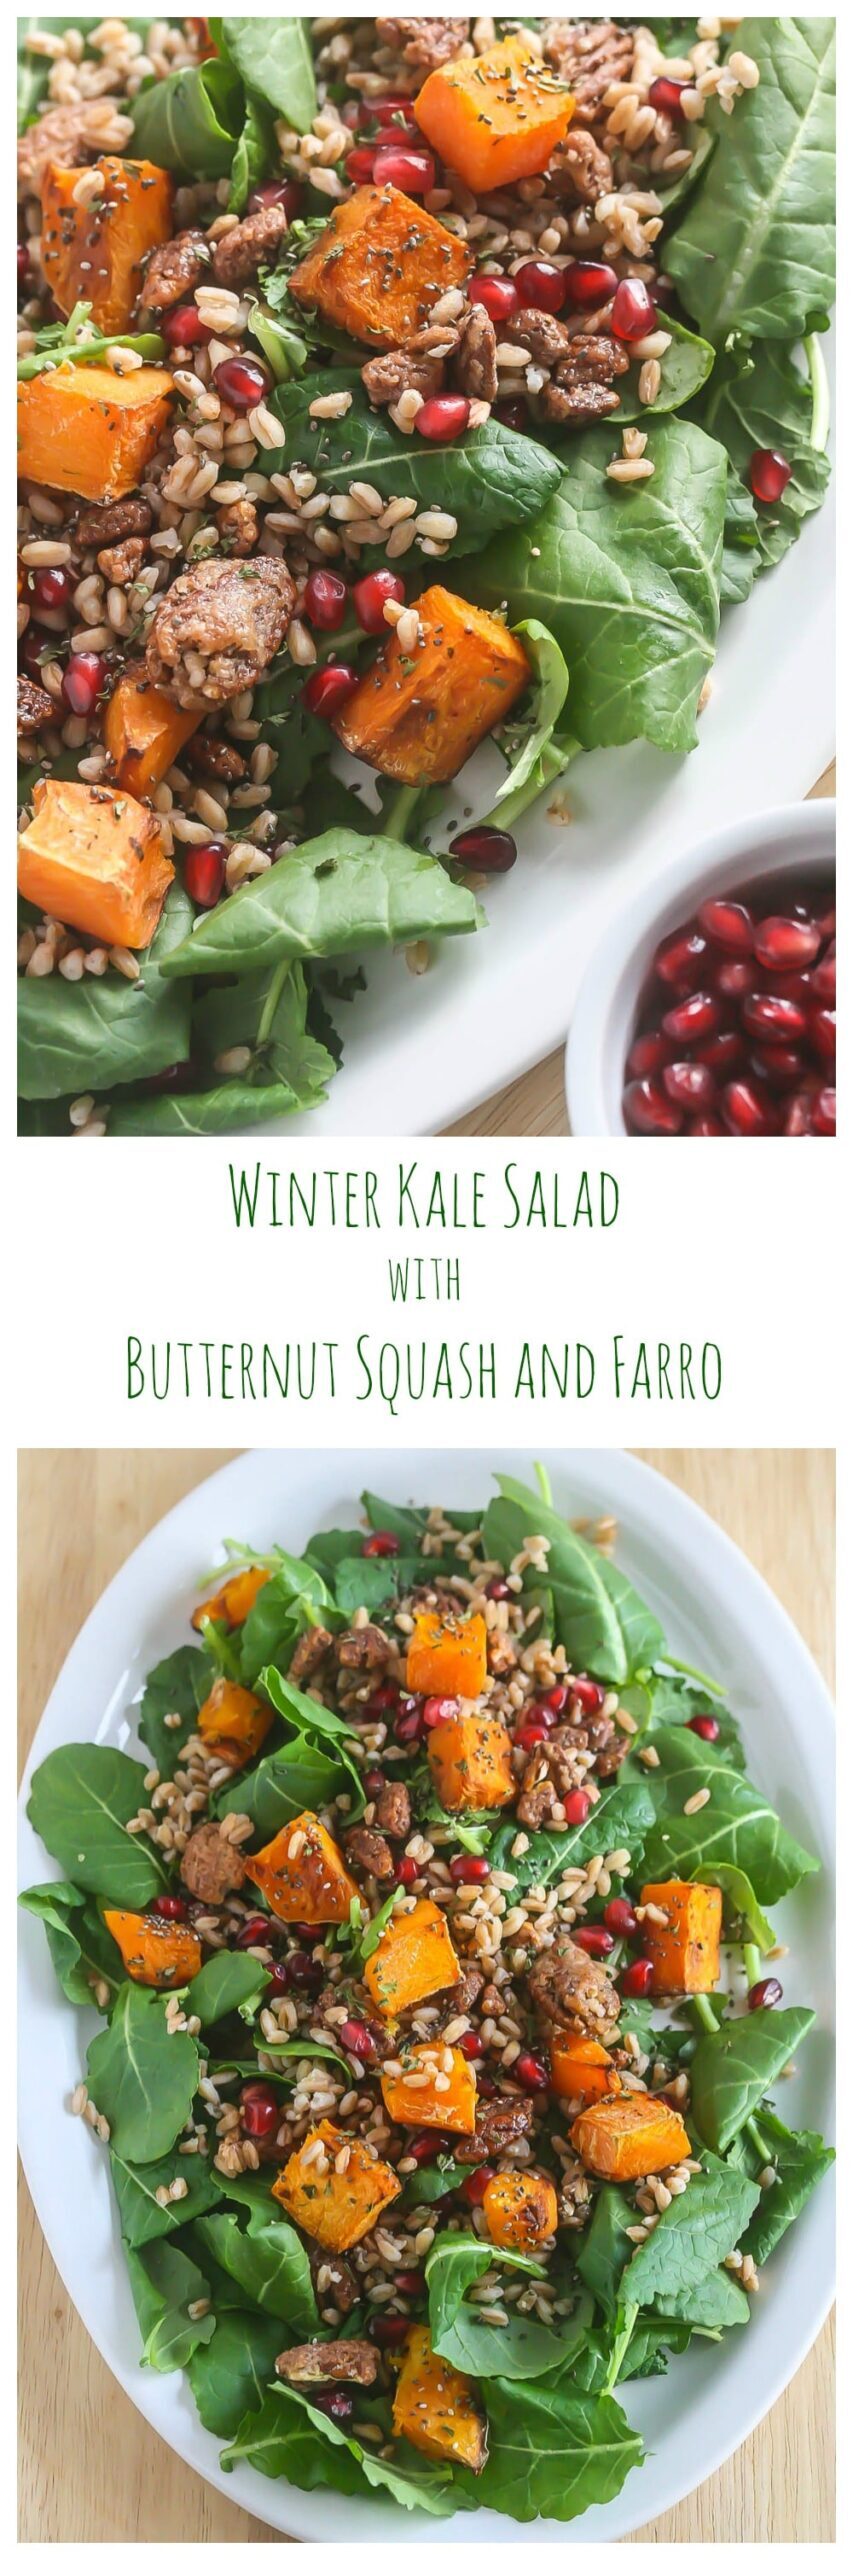 Winter Kale Salad with Butternut Squash and Farro from Lauren Kelly Nutrition.